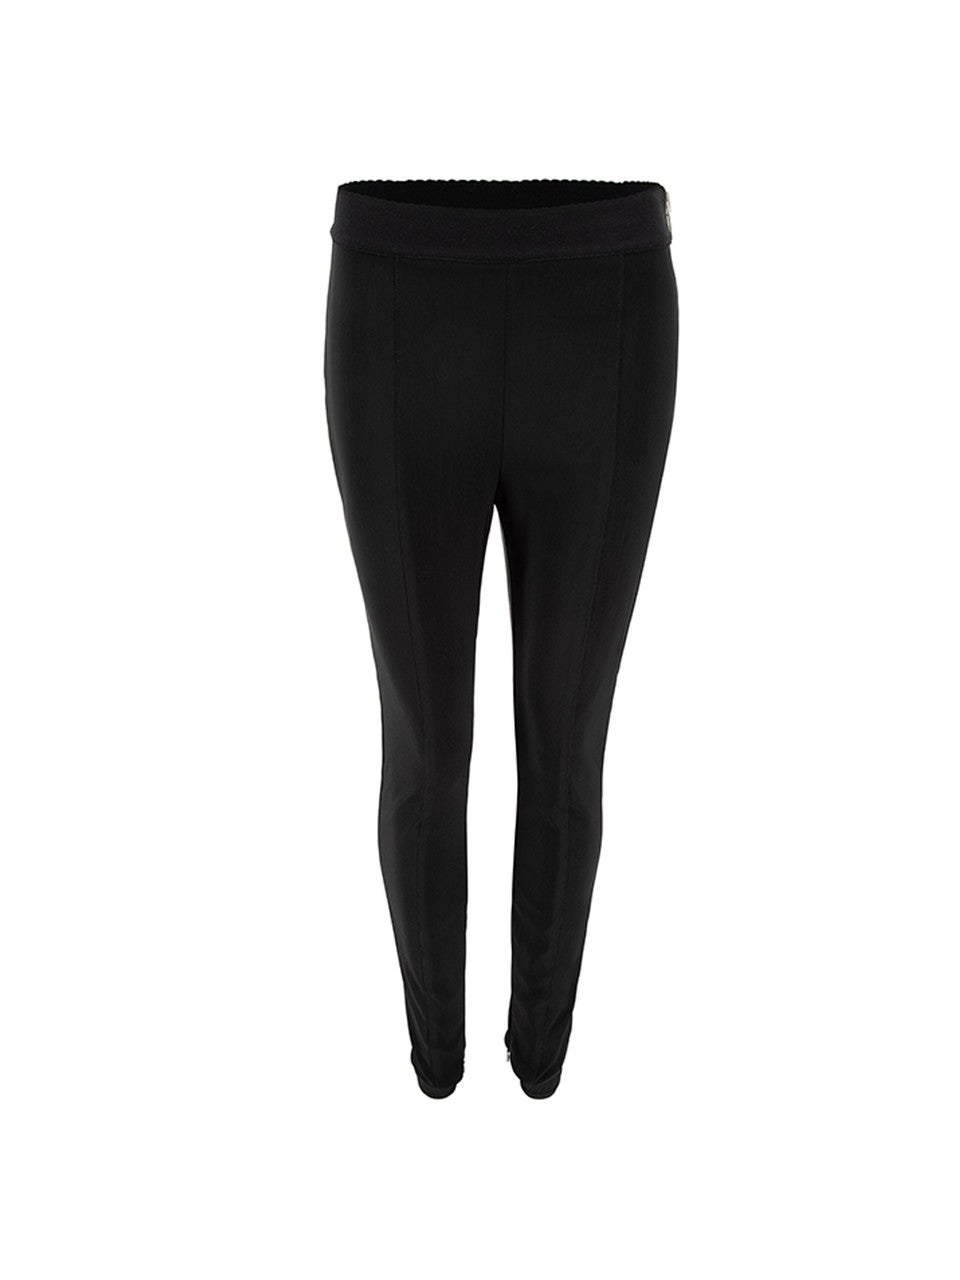 Pre-Loved Alexander Wang Women's Black Oversized Zip Accent Skinny Trousers For Sale